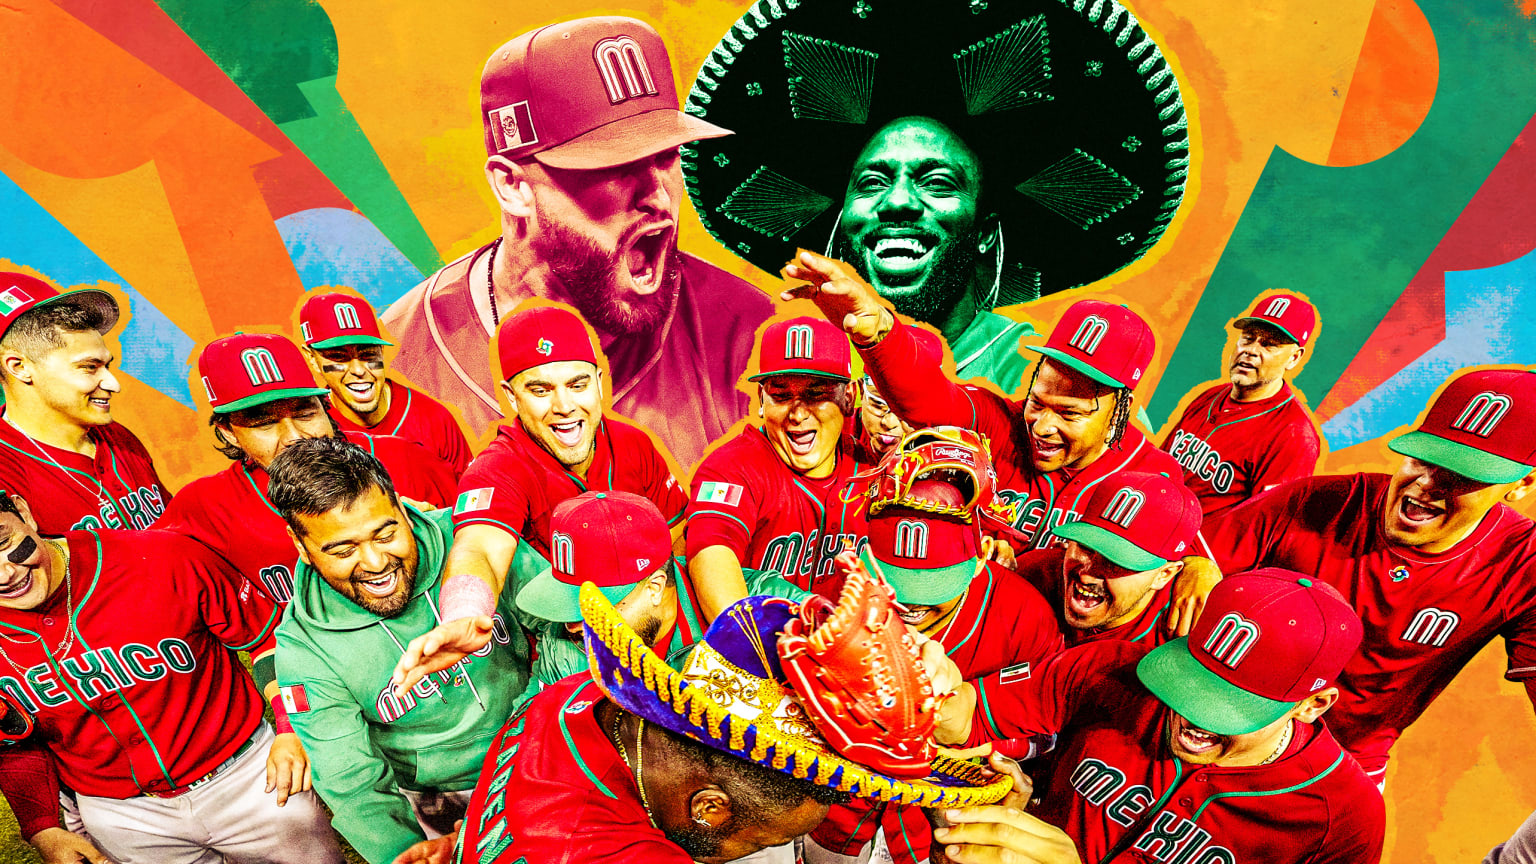 A photo illustration shows players from Team Mexico celebrating during the World Baseball Classic